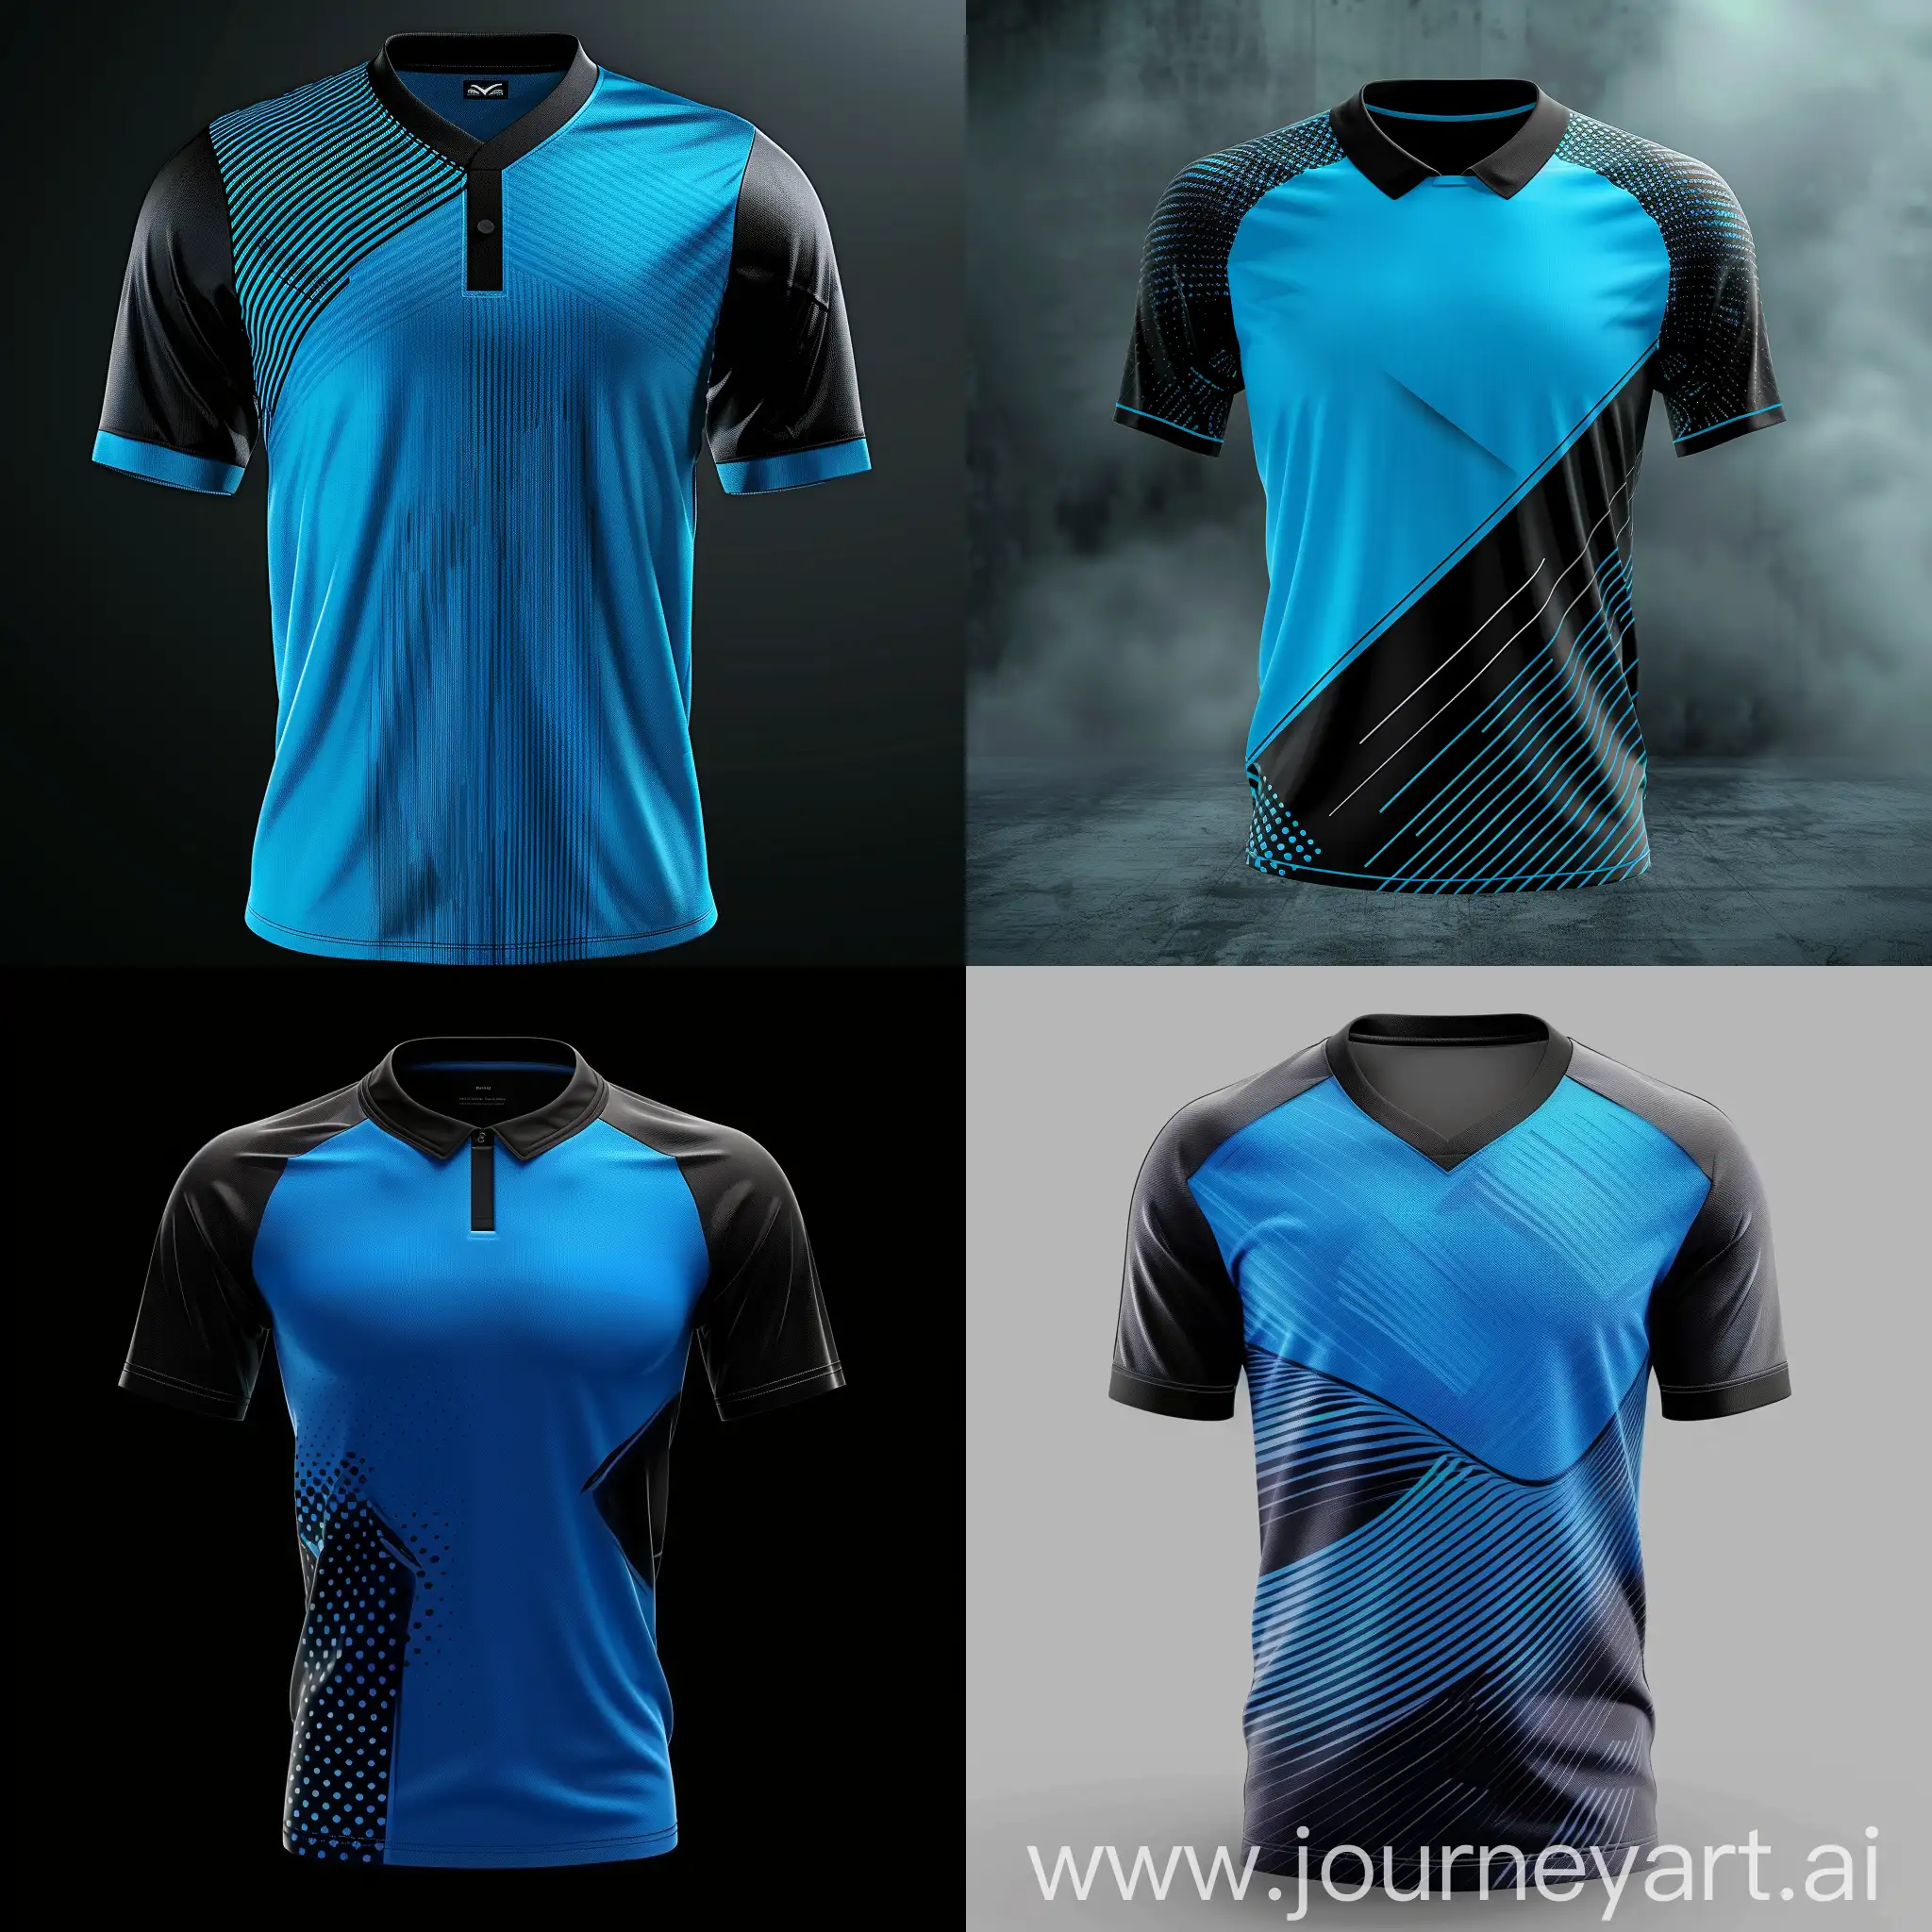 soccer jersey design, solid color, variation of blue and black, with small detail motives, elegant, 3D look, reality, high resolution